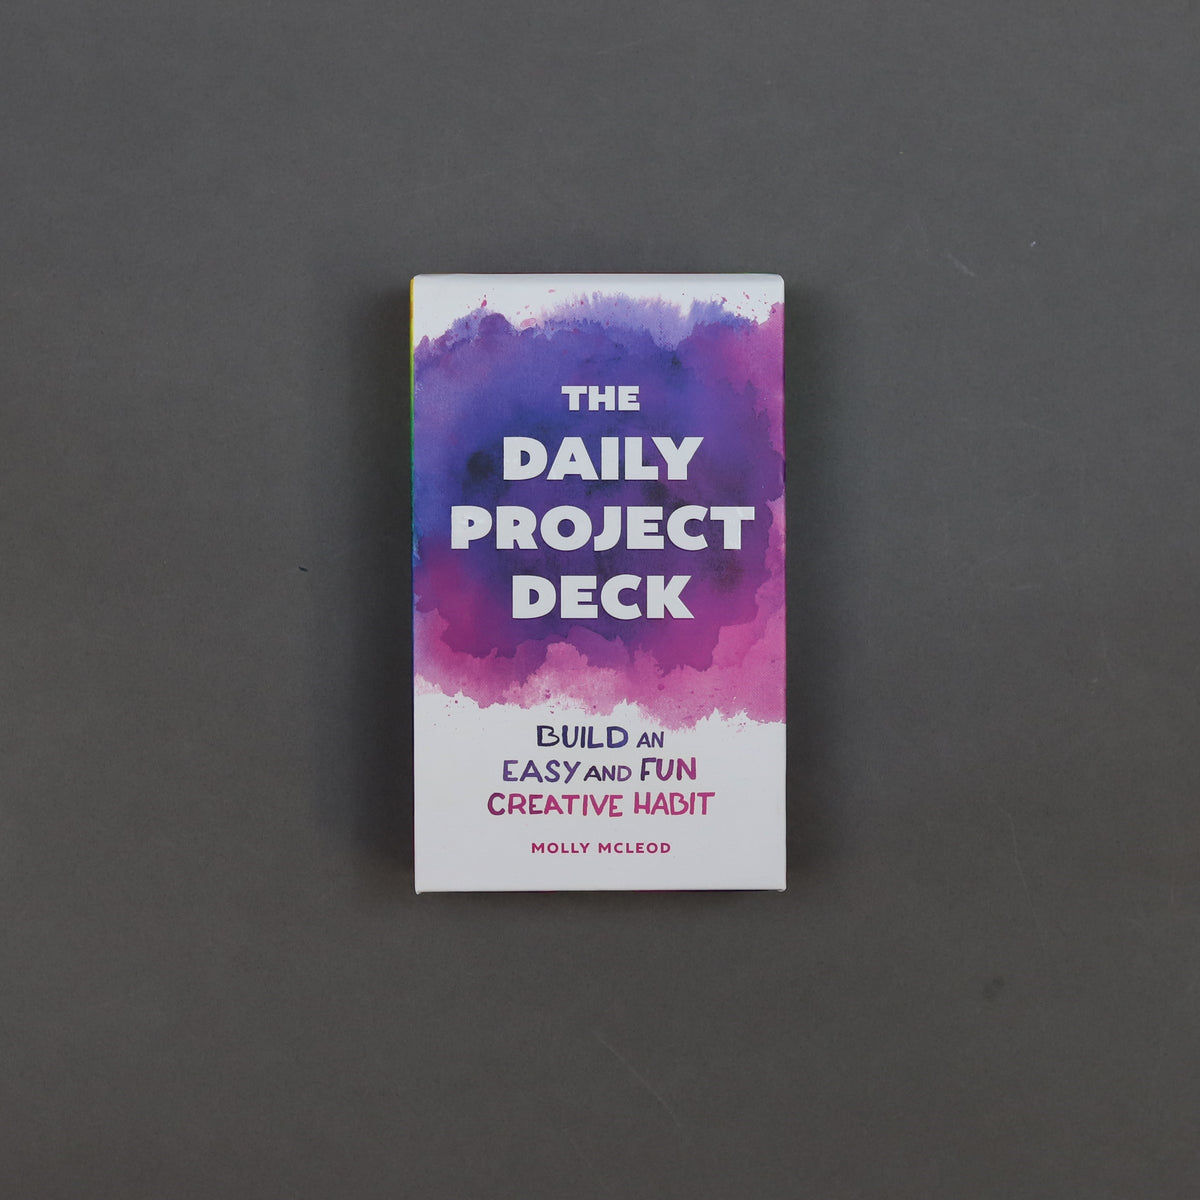 The Daily Project Deck